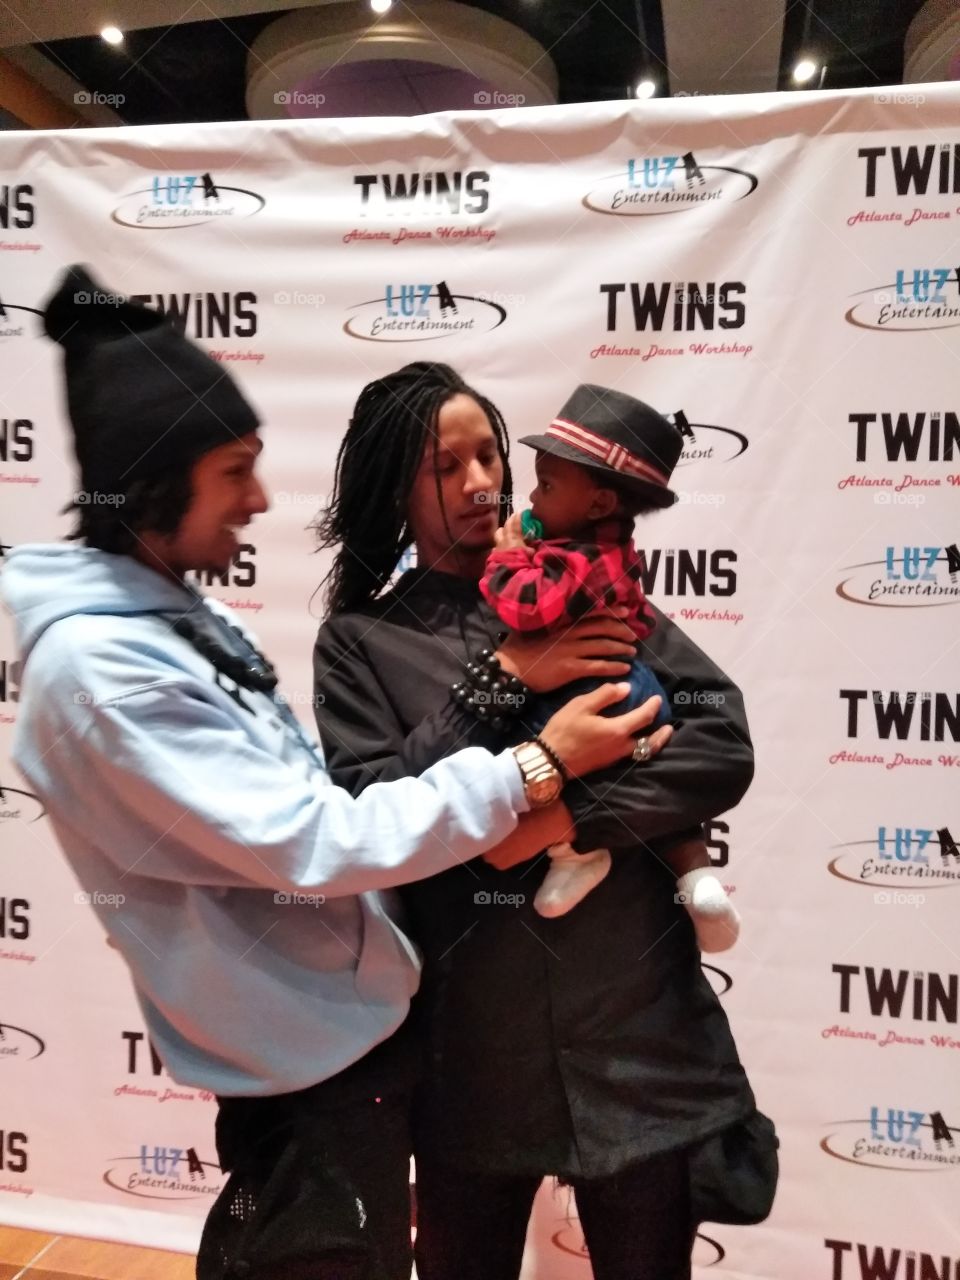 My Baby Loves the Les Twins